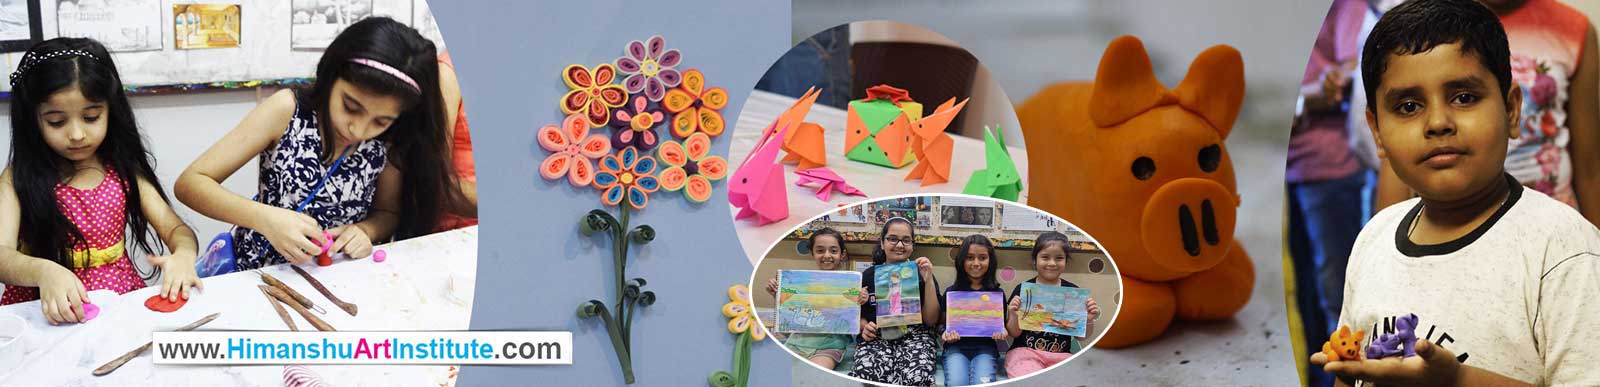 Drawing, Painting, Art & Craft Workshop for Kids